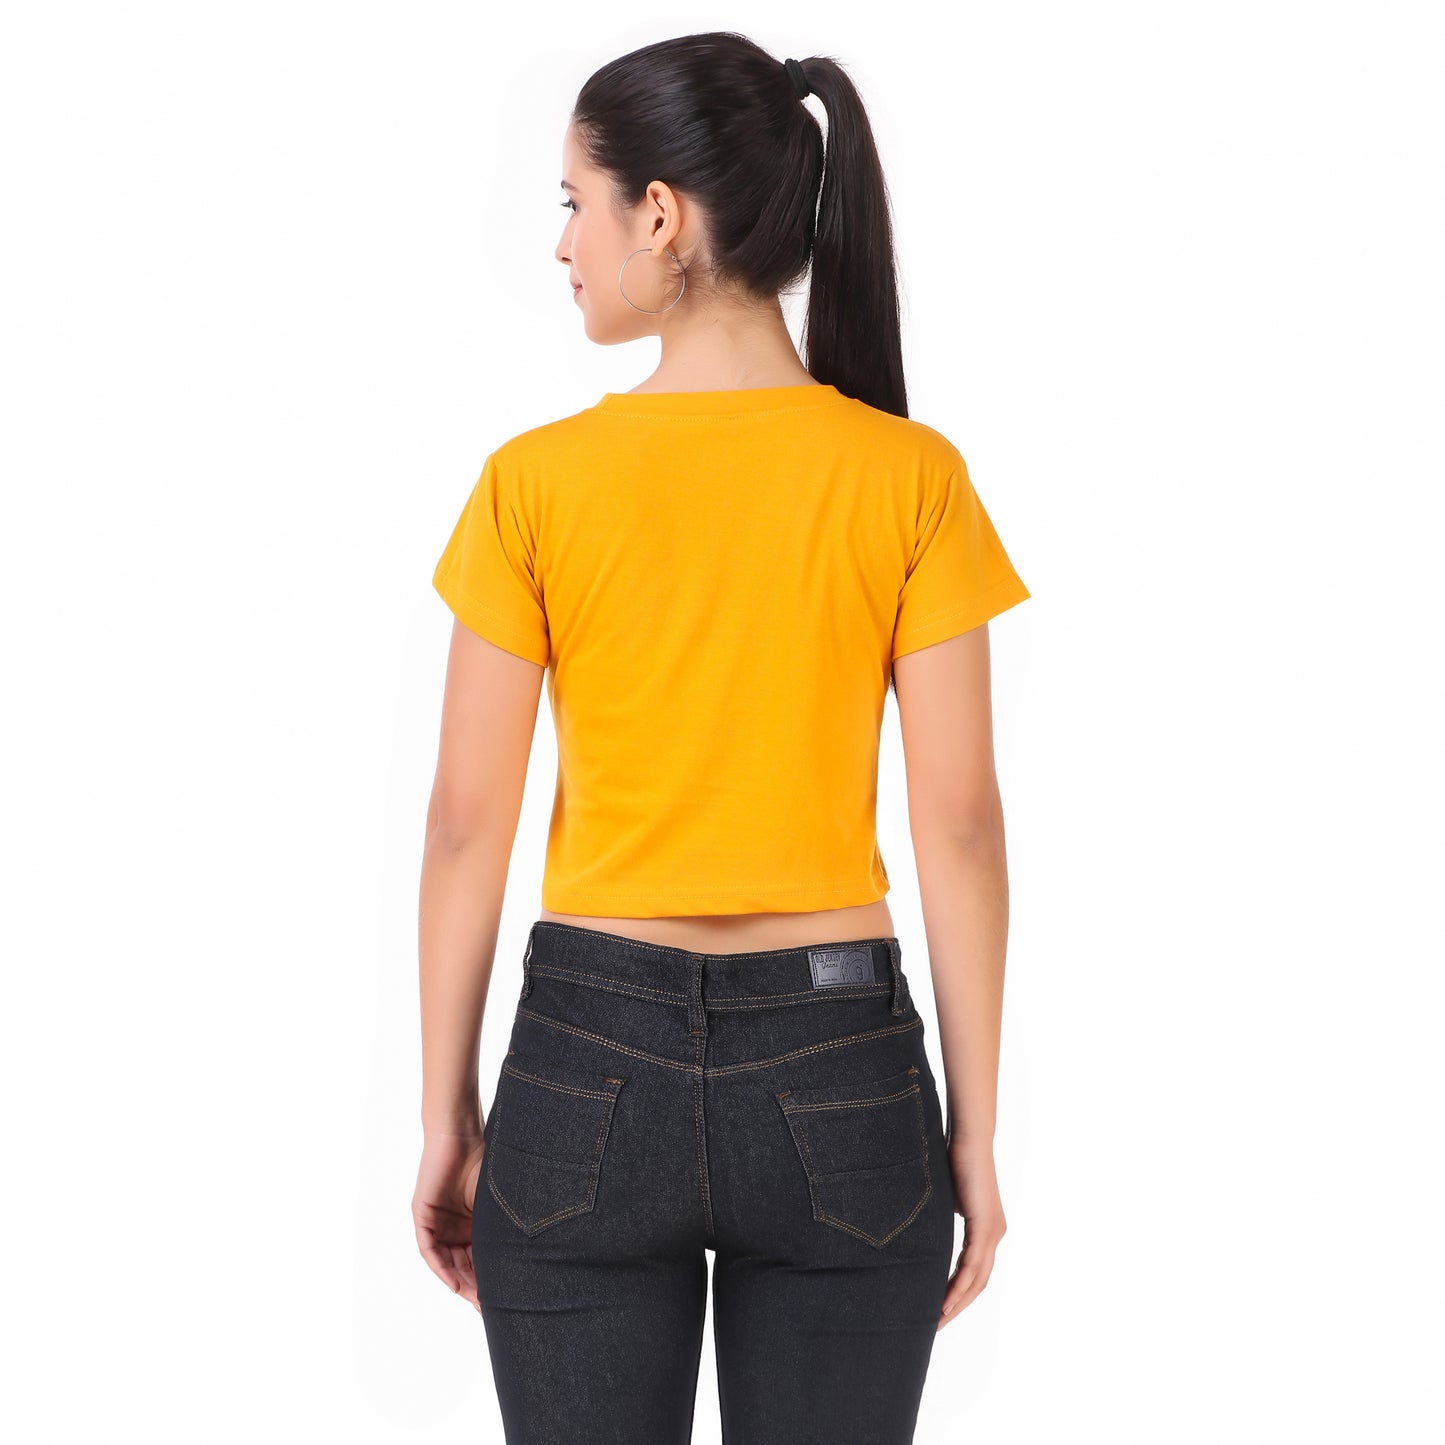 Mustard Dog & Mustard Yes Daddy Print Combo(2 Tops) Crop Tops!!